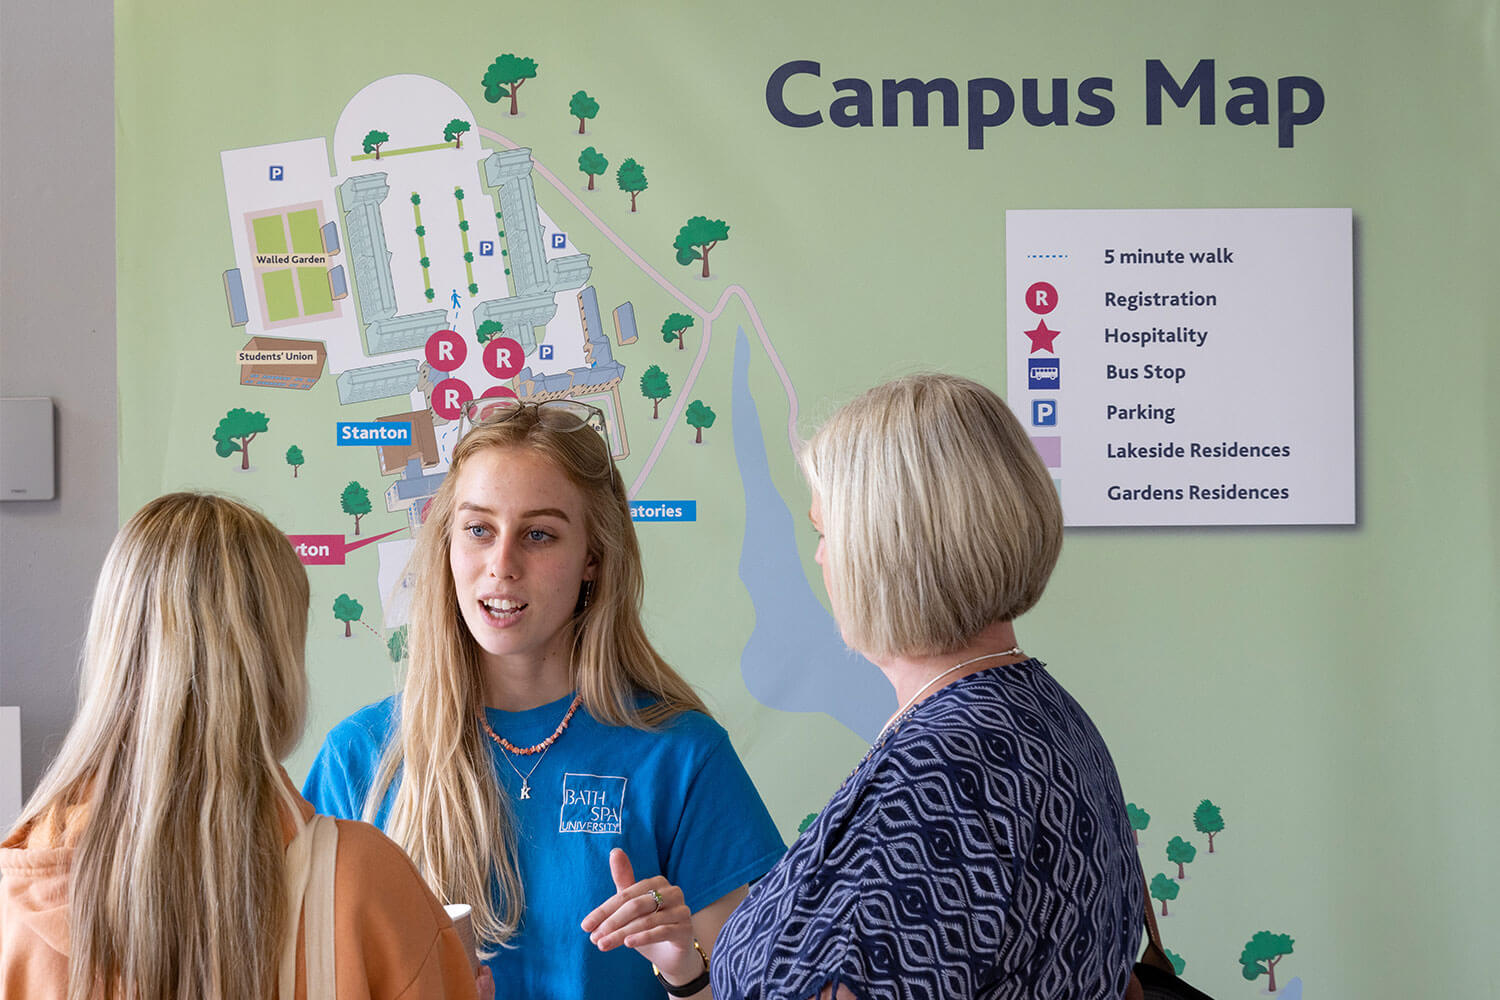 A student ambassador talks to visitors to the university in front of a map of the campus